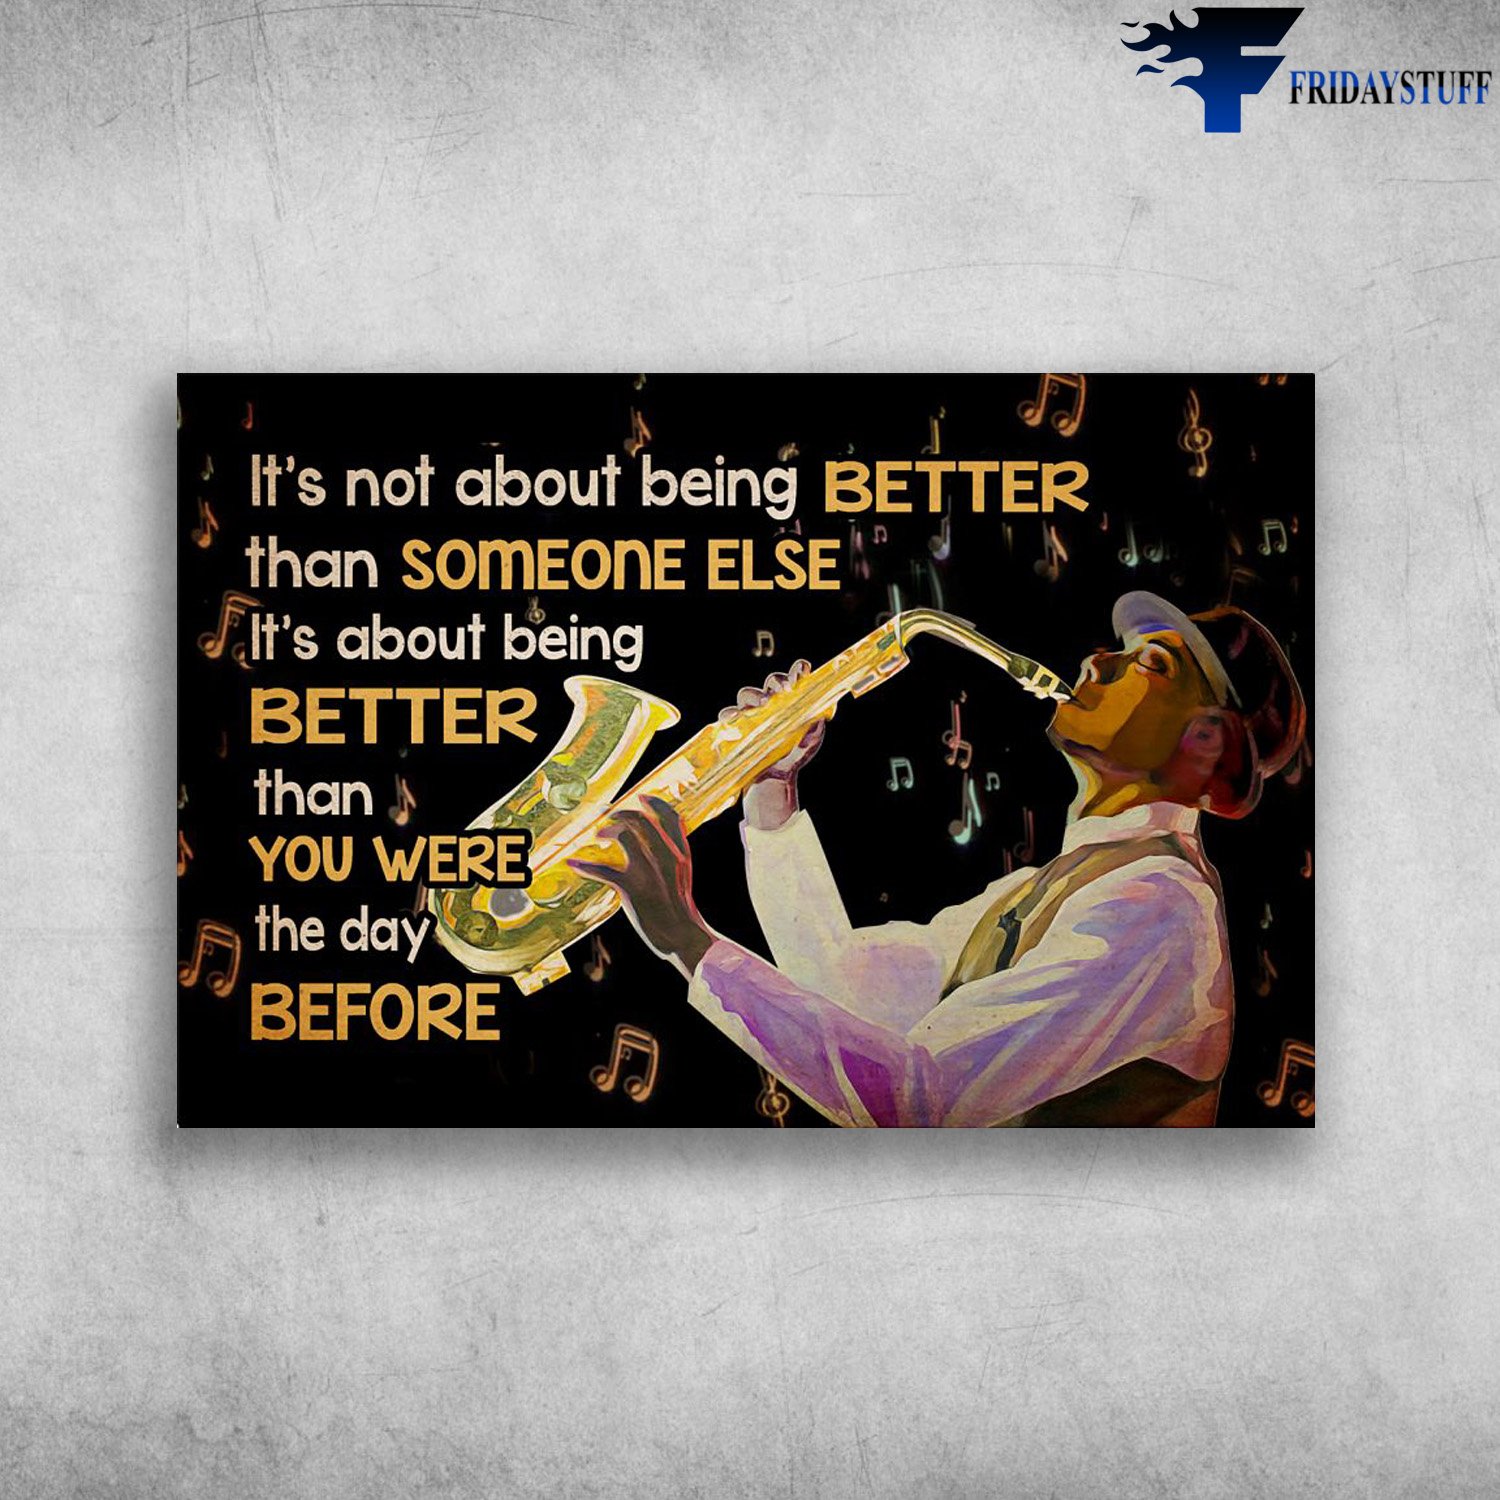 Man Saxophone - It's Not About Being Better Than Someone Else, It About Being Better Than You Were The Day Before